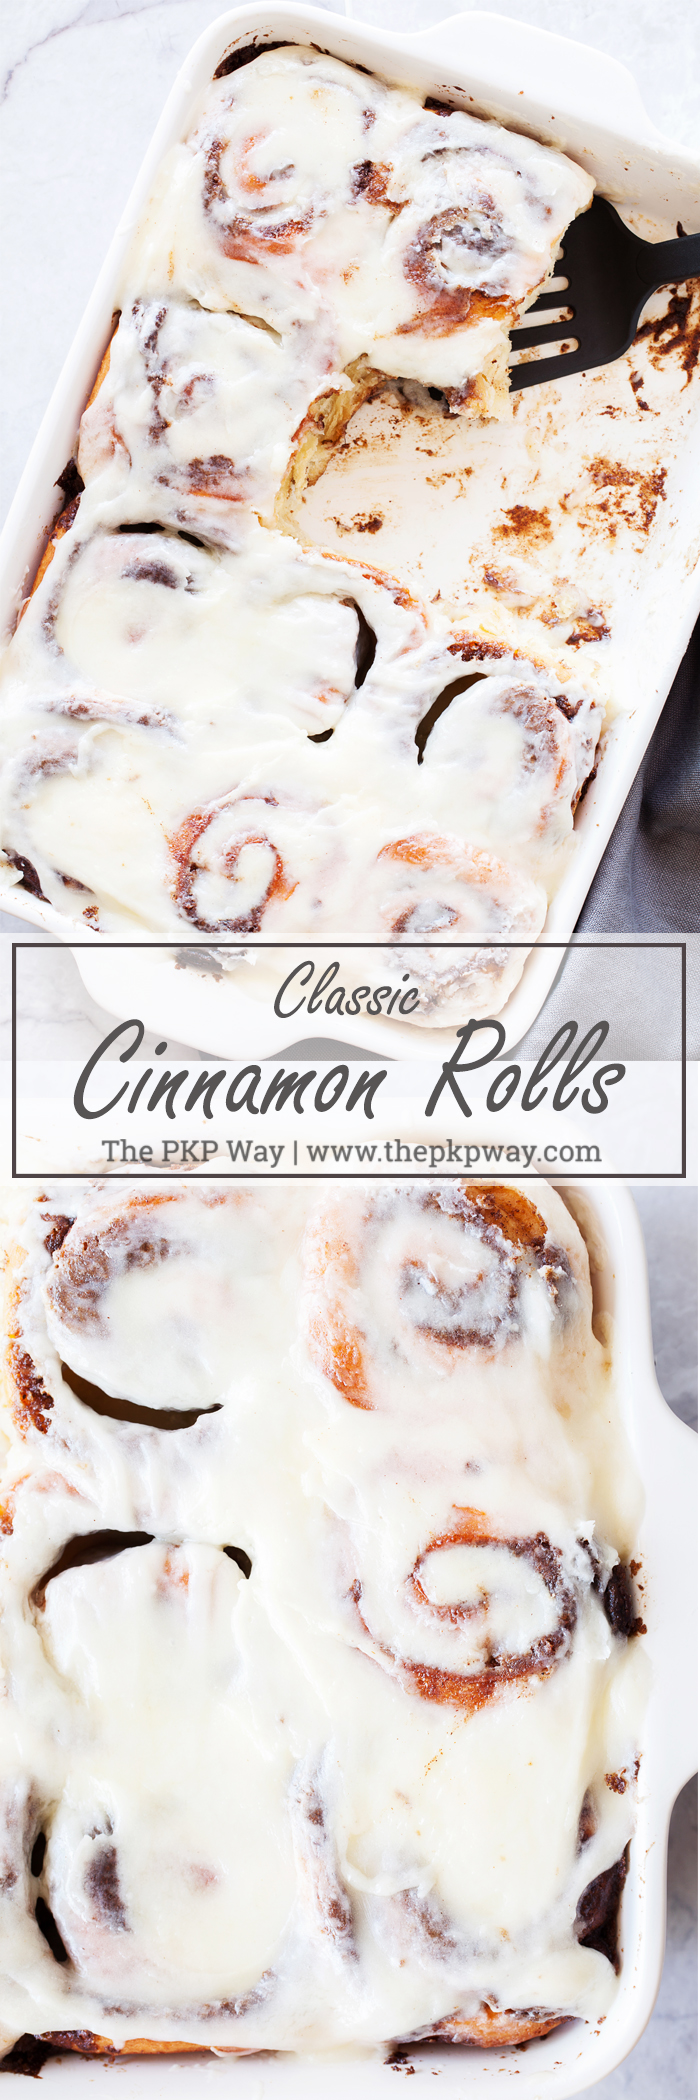 These Classic Cinnamon Rolls are filled with a cinnamon and sugar filling and topped with a sweet and tangy cream cheese glaze.